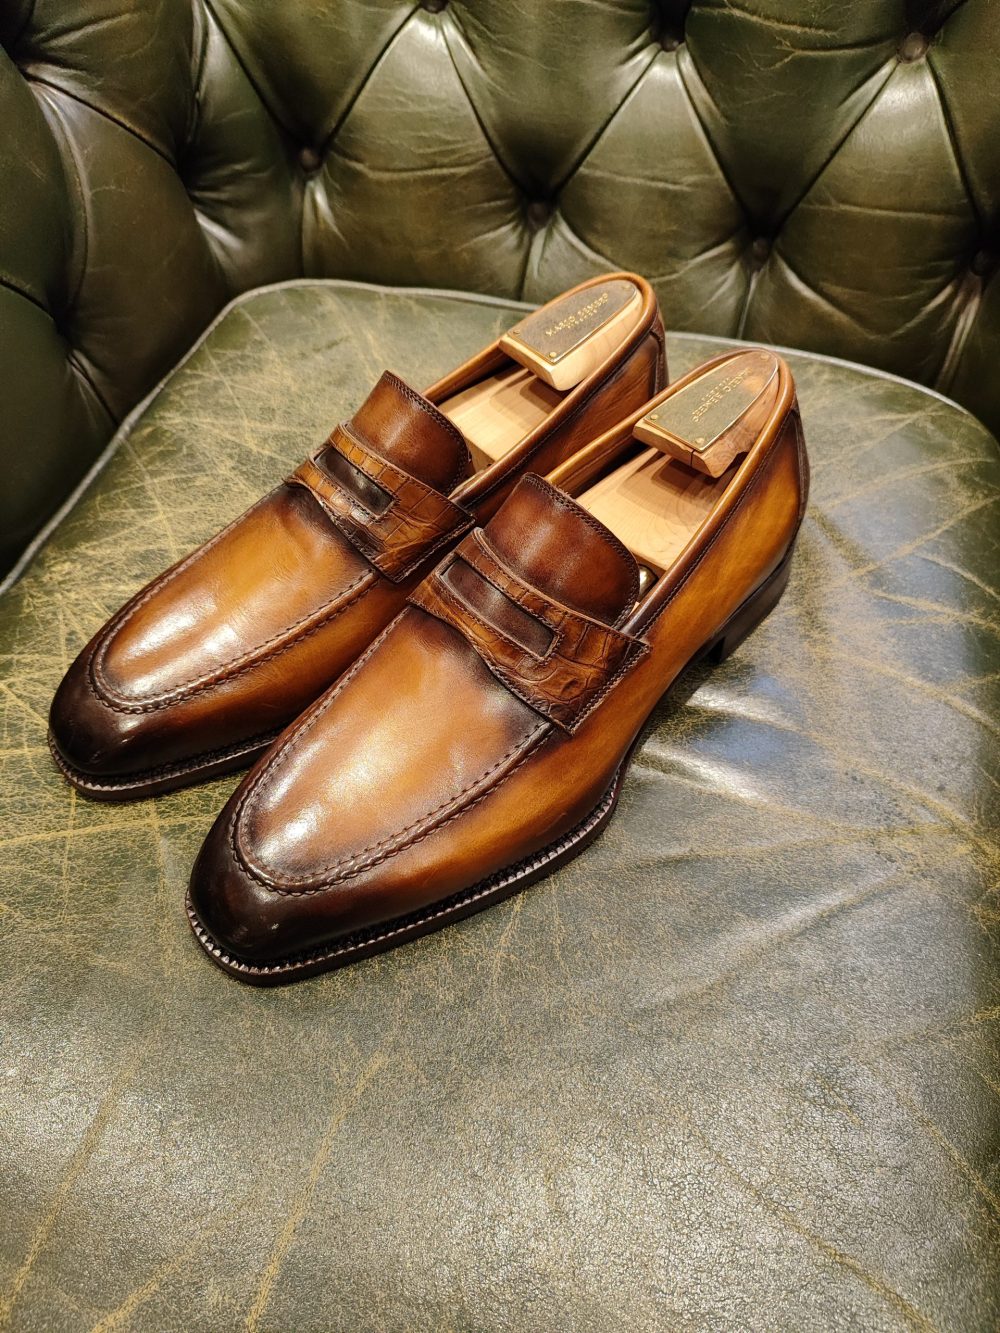 Mario Bemer Firenze Lauro custom-shop penny loafers with croco detail